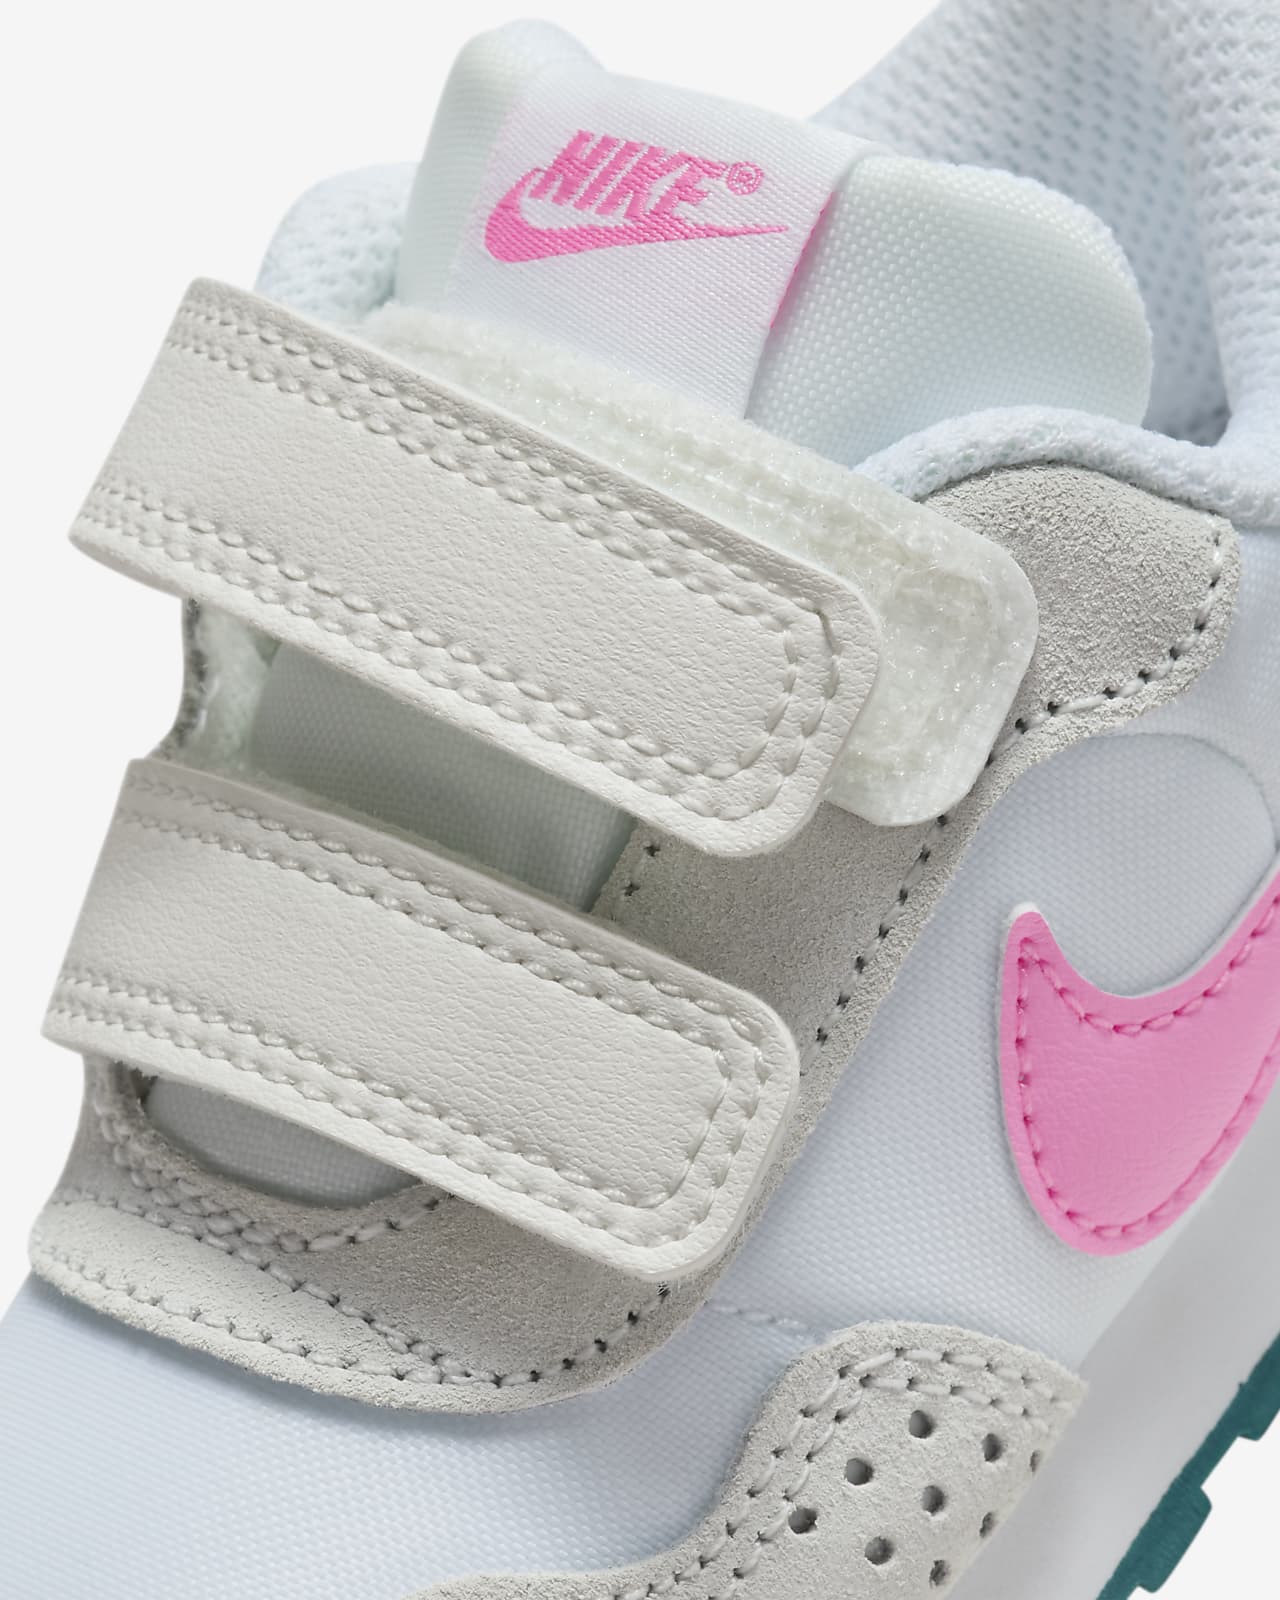 Toddler MD Baby Nike Shoe. Valiant ID and Nike